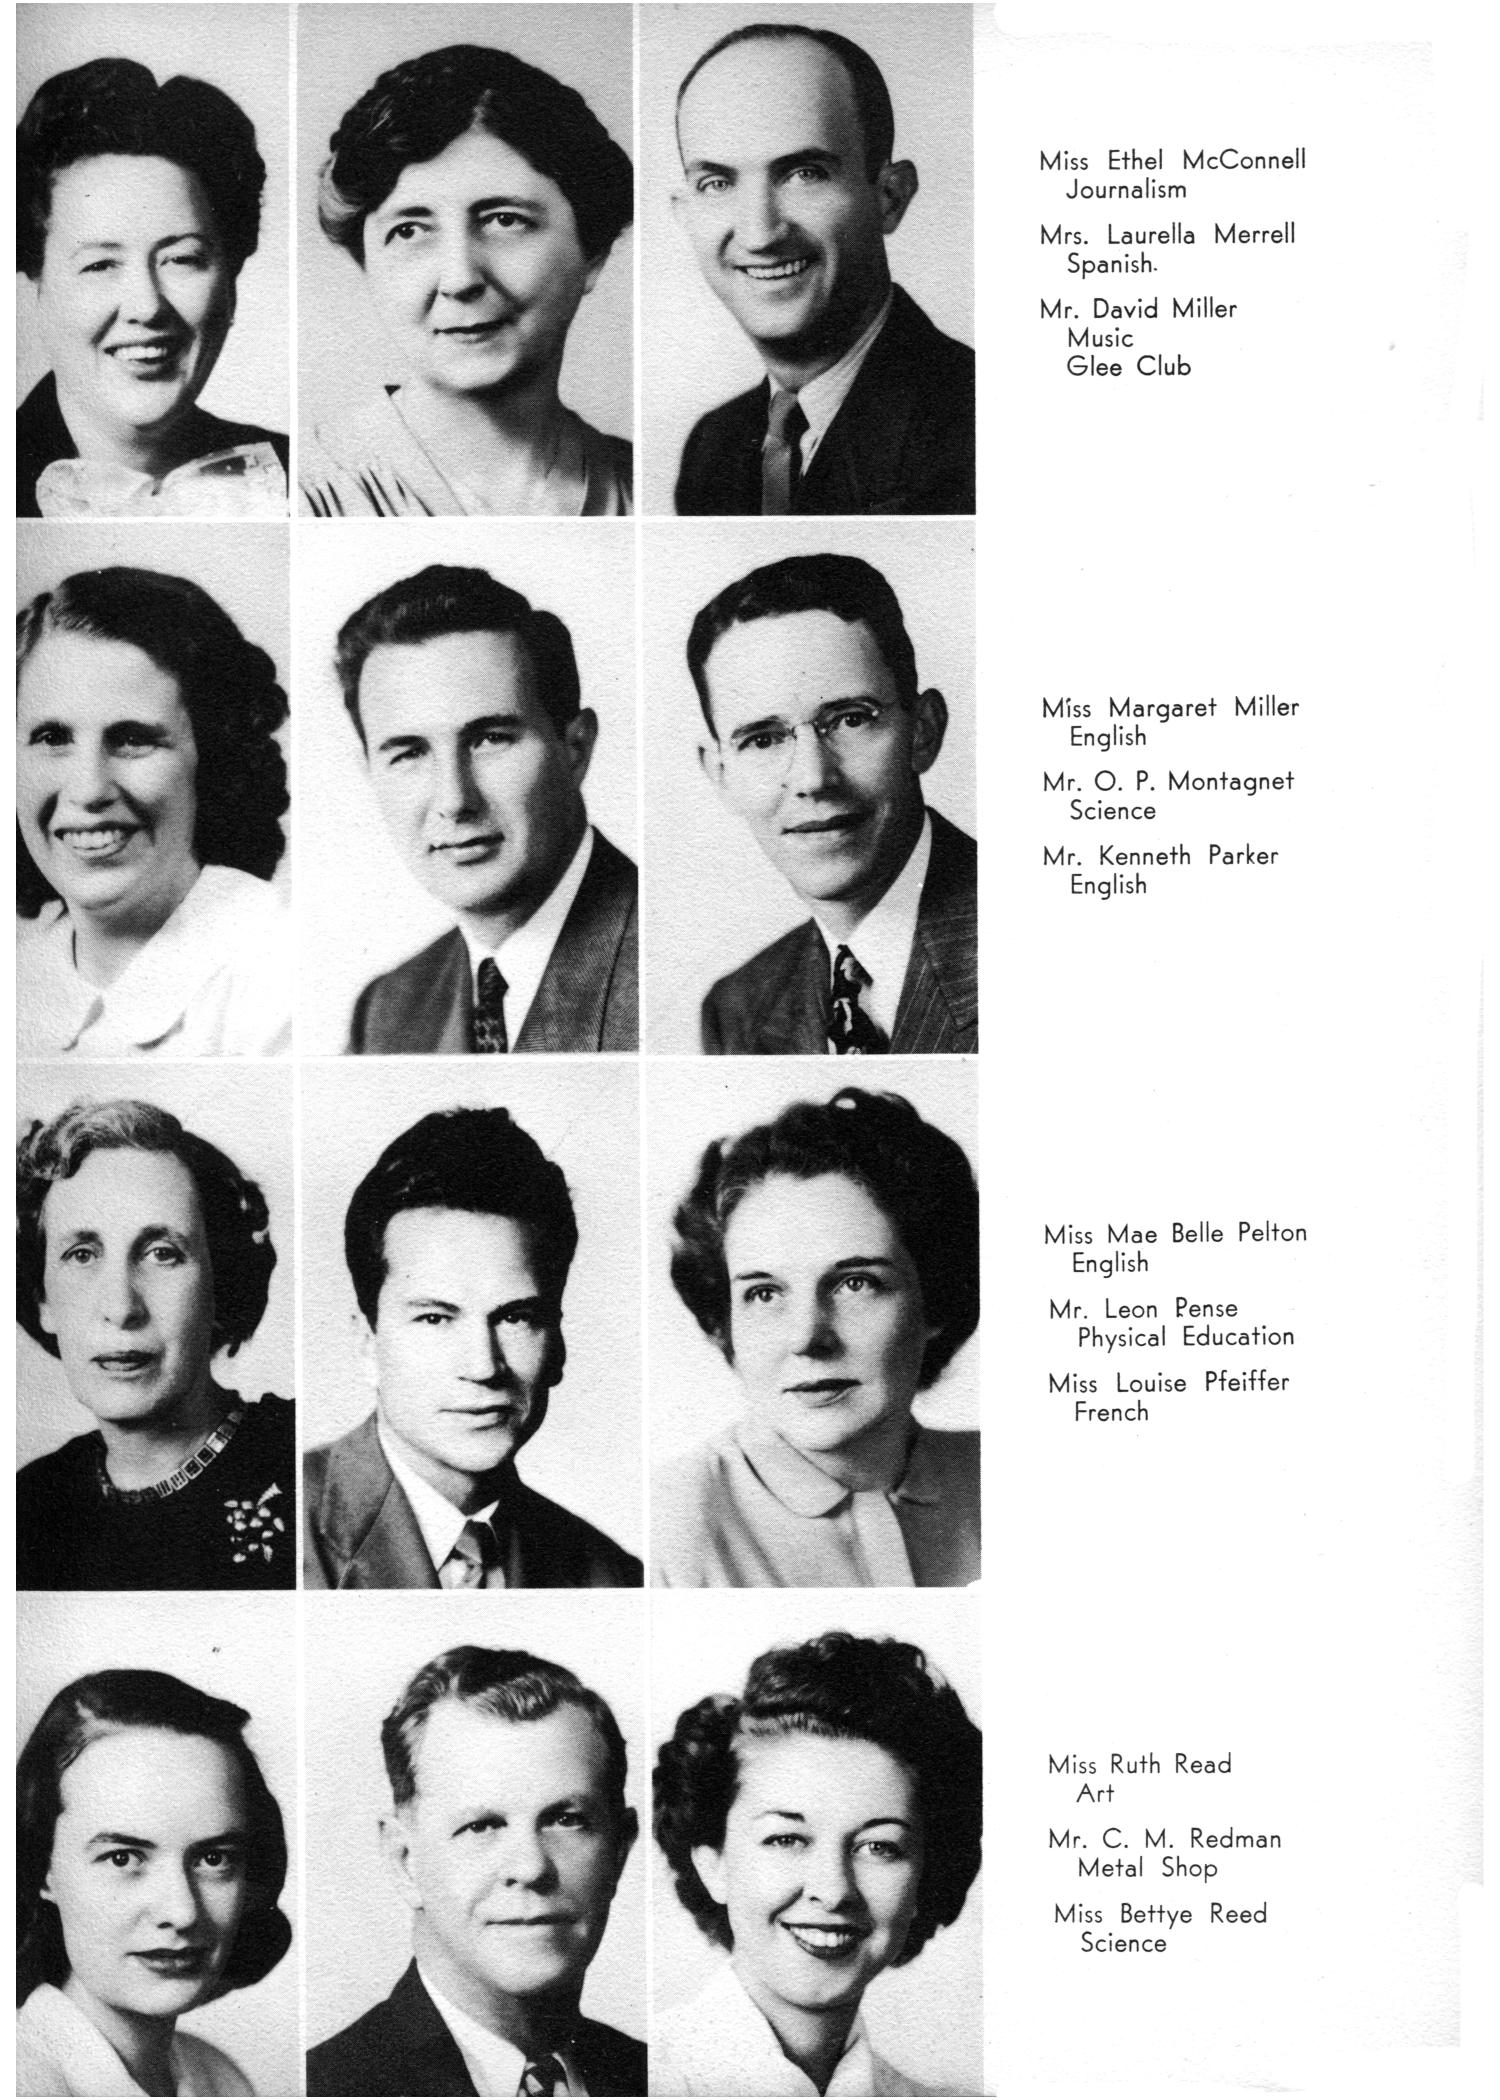 The Yellow Jacket, Yearbook of Thomas Jefferson High School, 1948
                                                
                                                    9
                                                